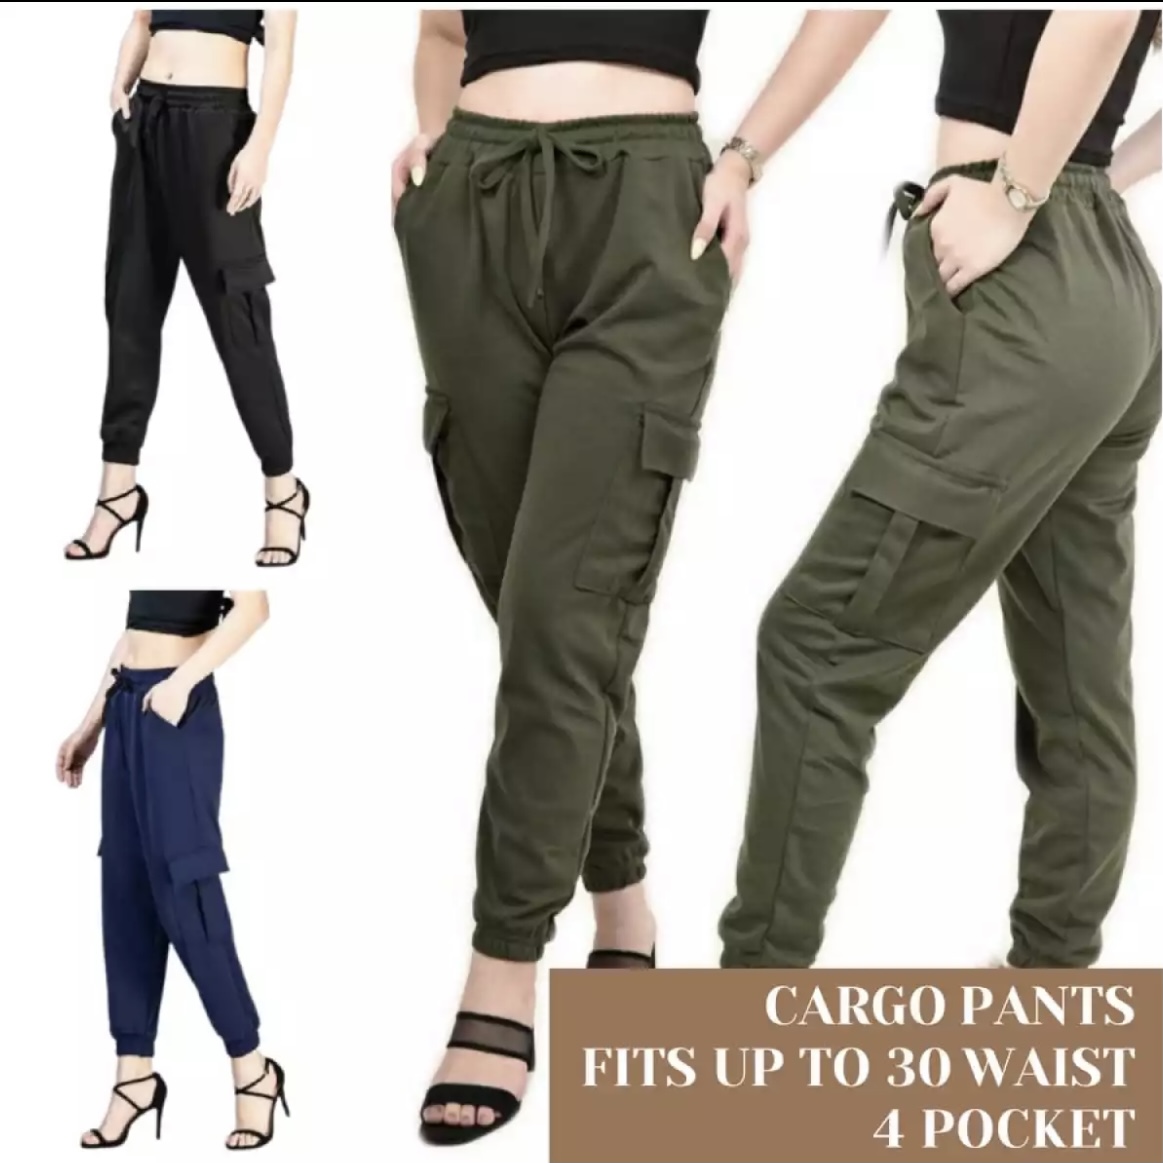 Buy Chic Wide Leg Style 4-Pocket Cargo Pants for Women - Versatile and  Trendy Bottoms (L, Black) at Amazon.in